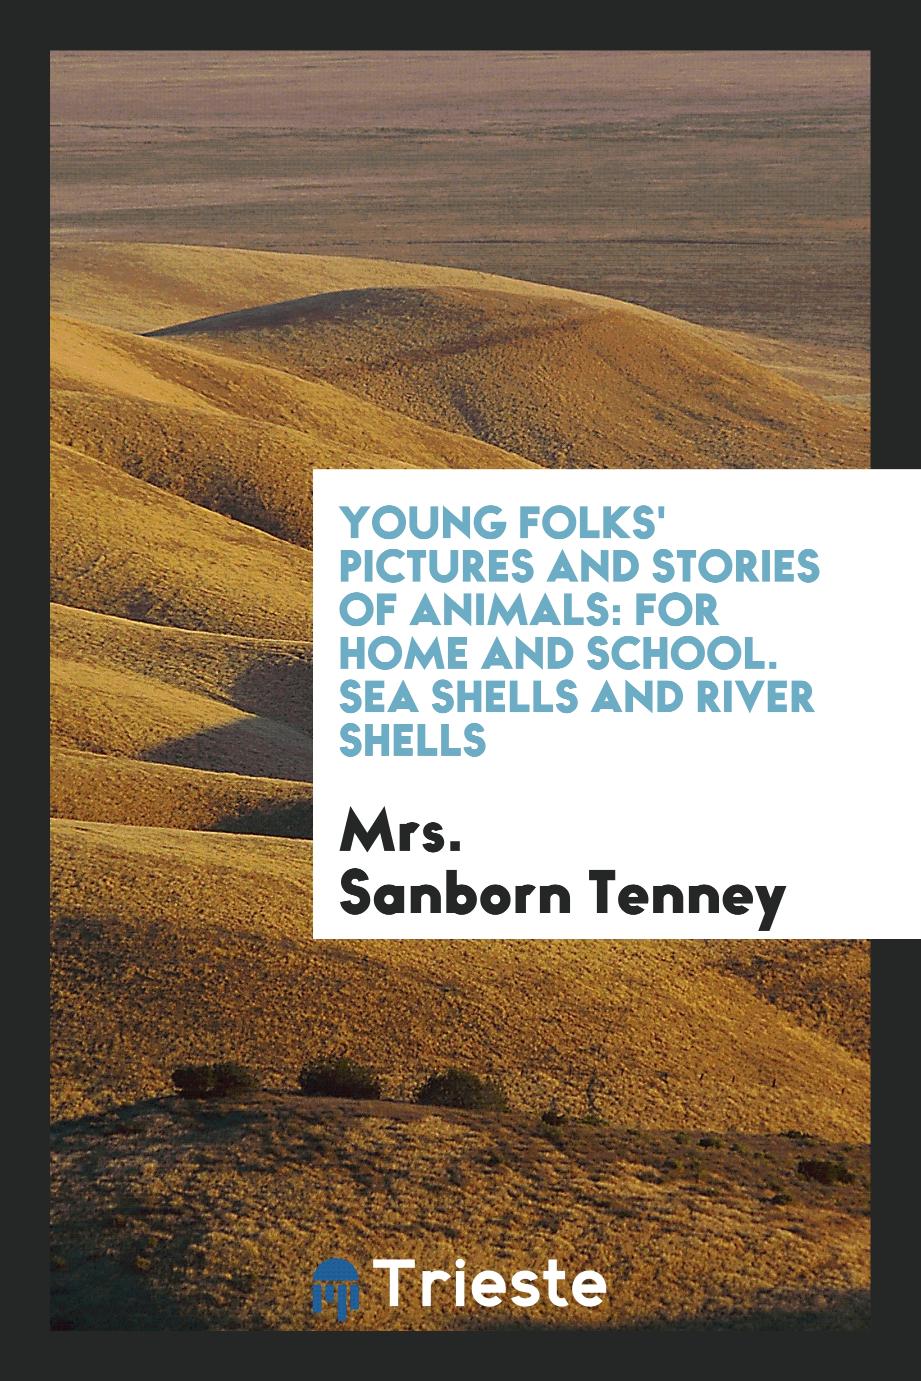 Young Folks' Pictures and Stories of Animals: For Home and School. Sea Shells and River Shells